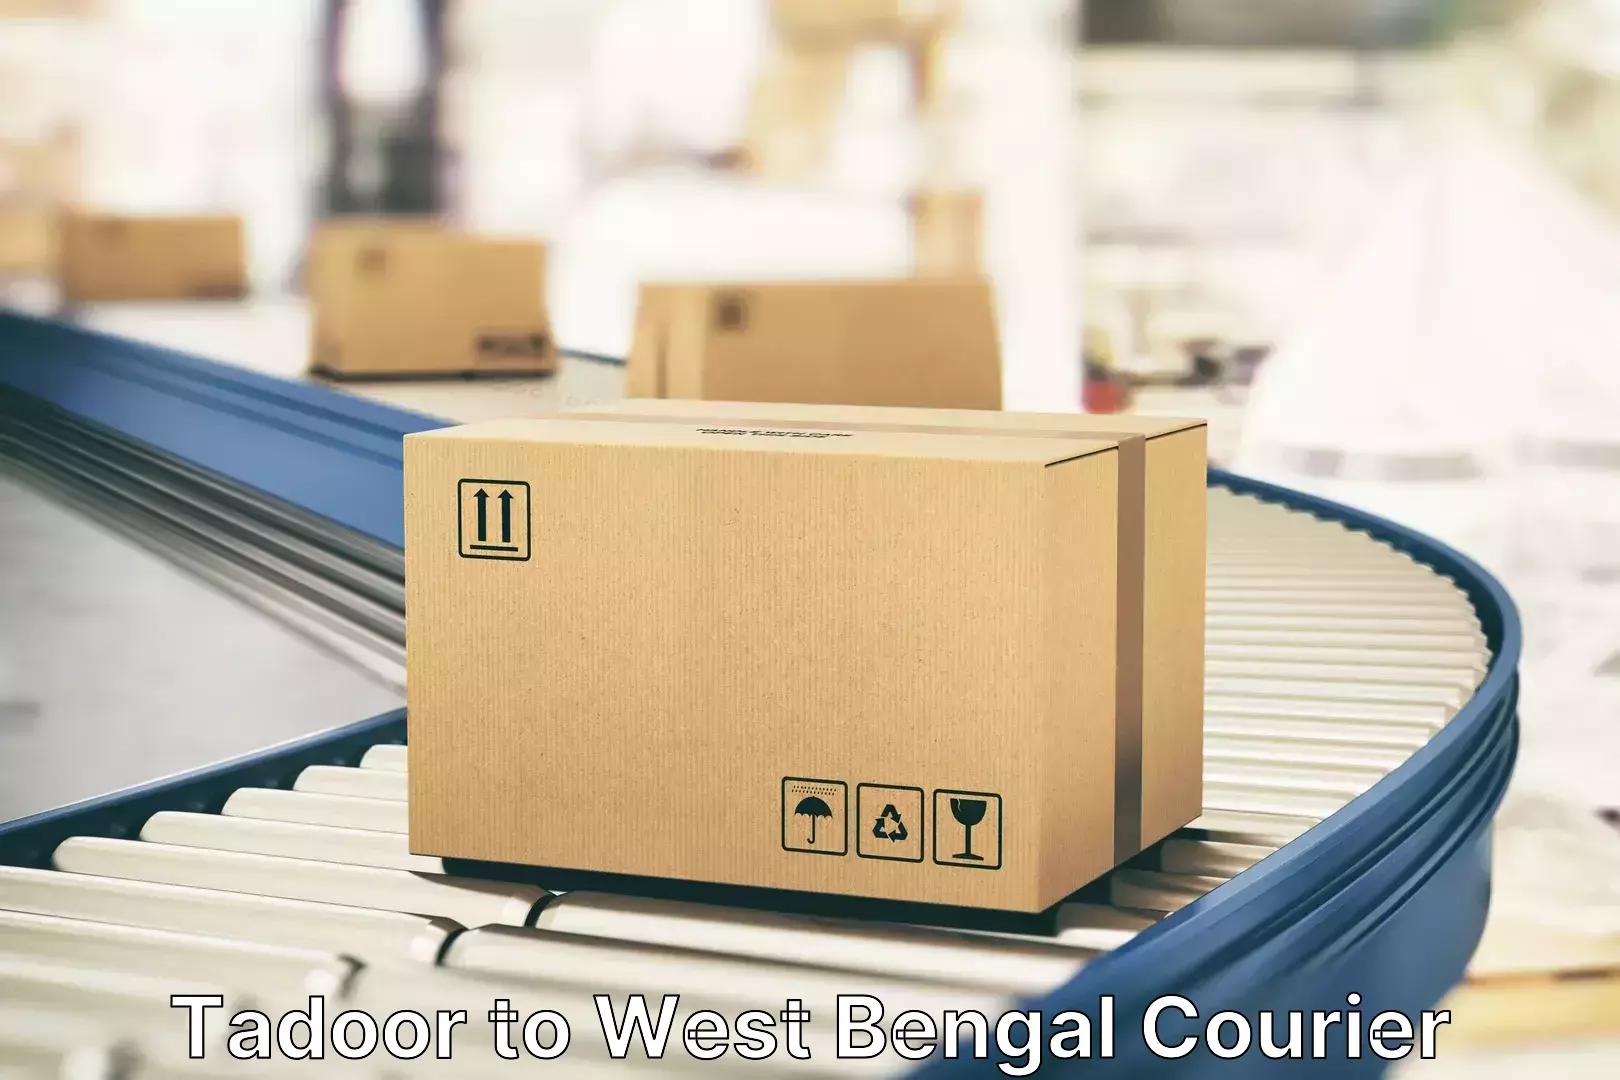 Domestic luggage transport Tadoor to West Bengal